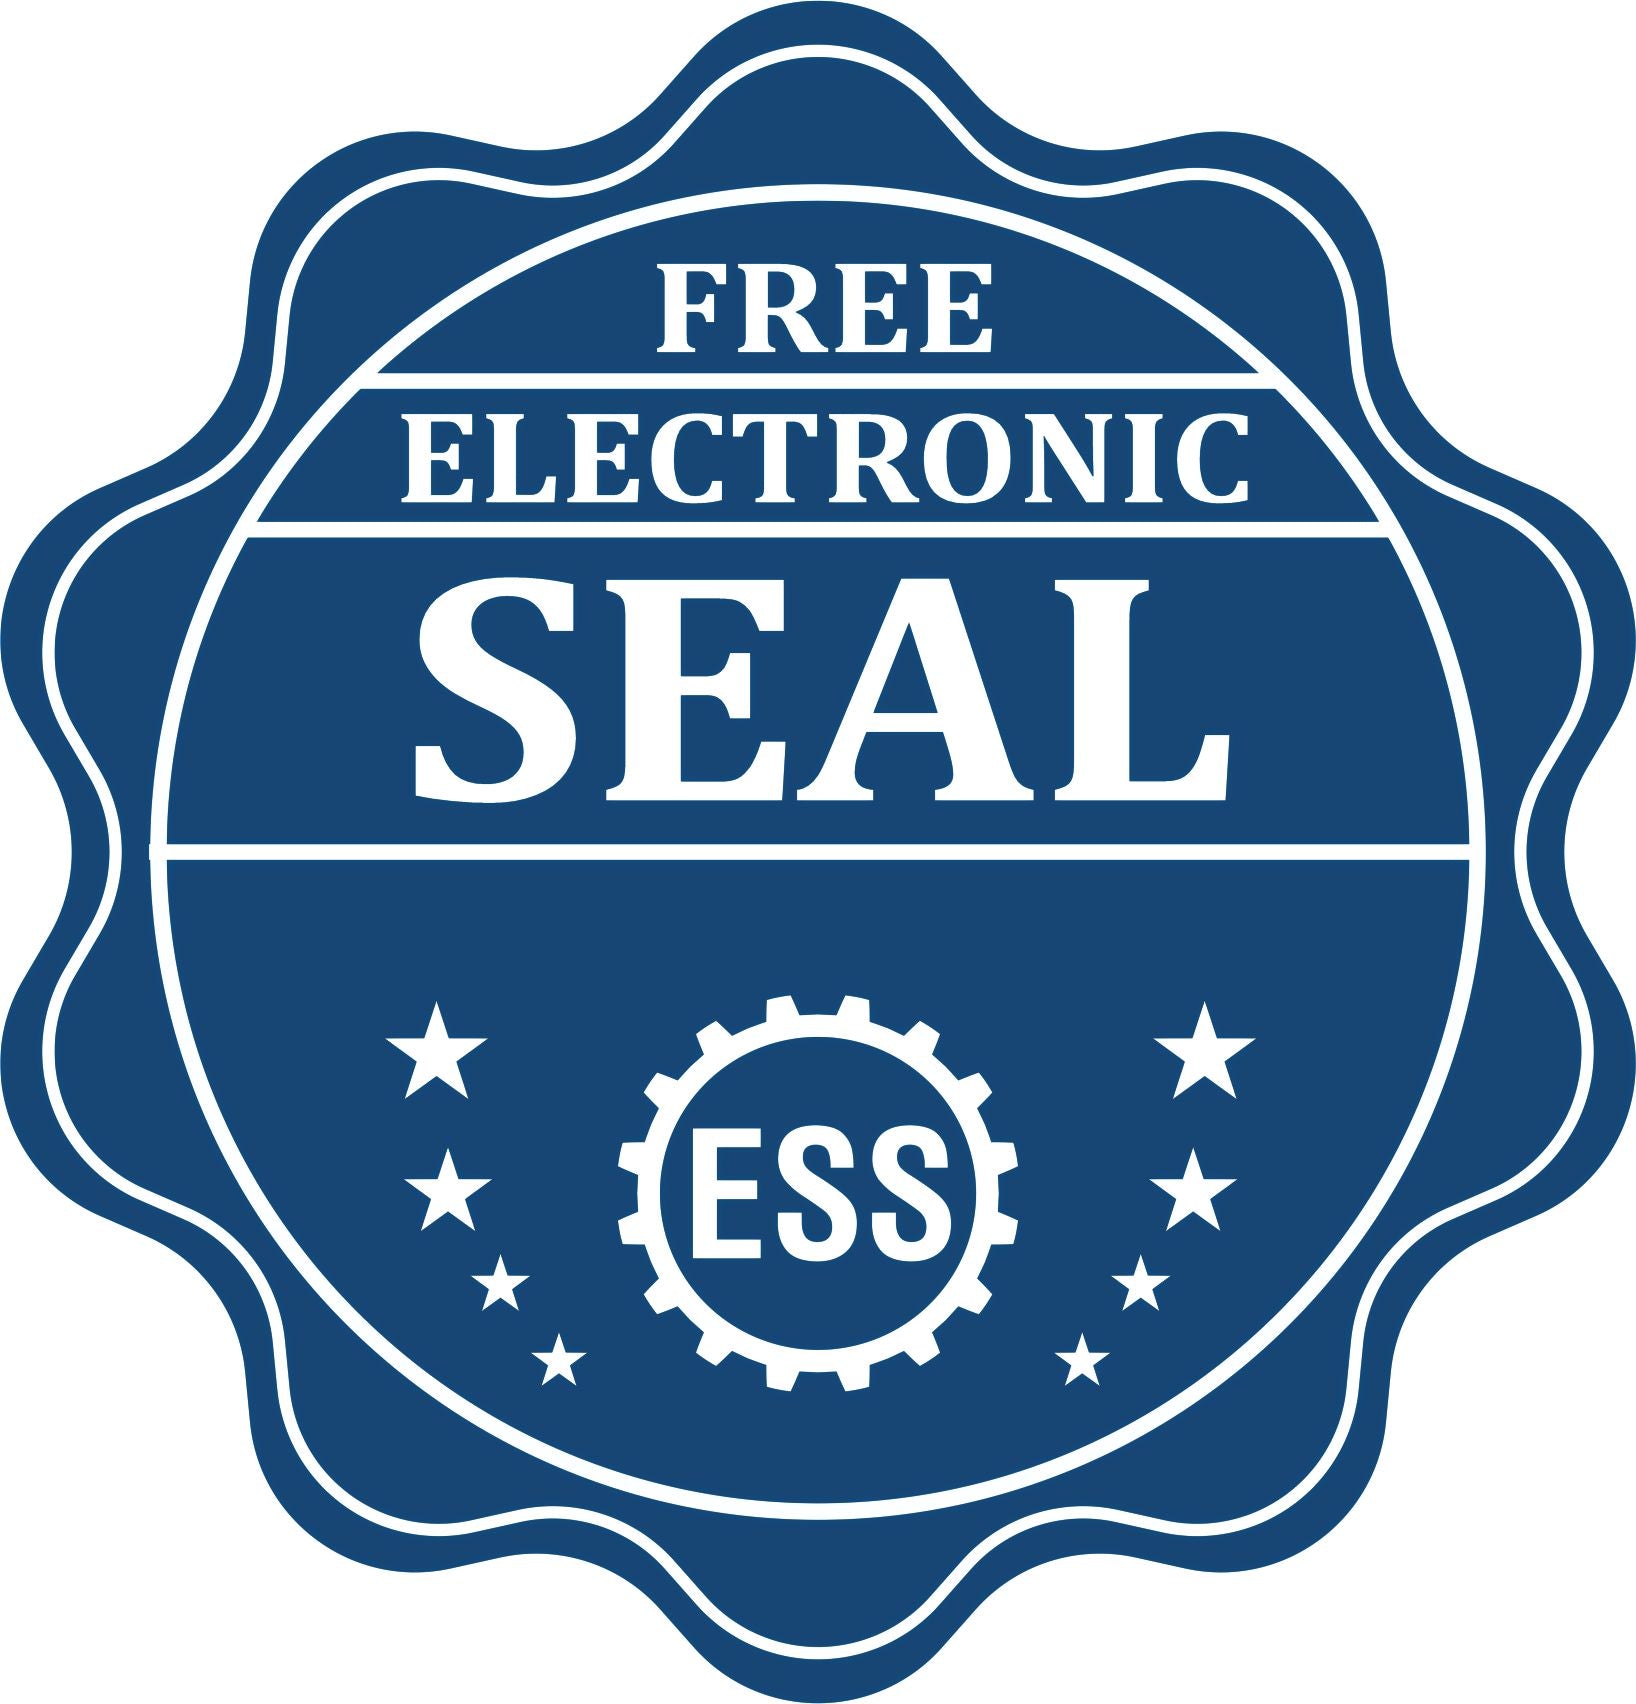 A badge showing a free electronic seal for the Long Reach North Dakota PE Seal with stars and the ESS gear on the emblem.